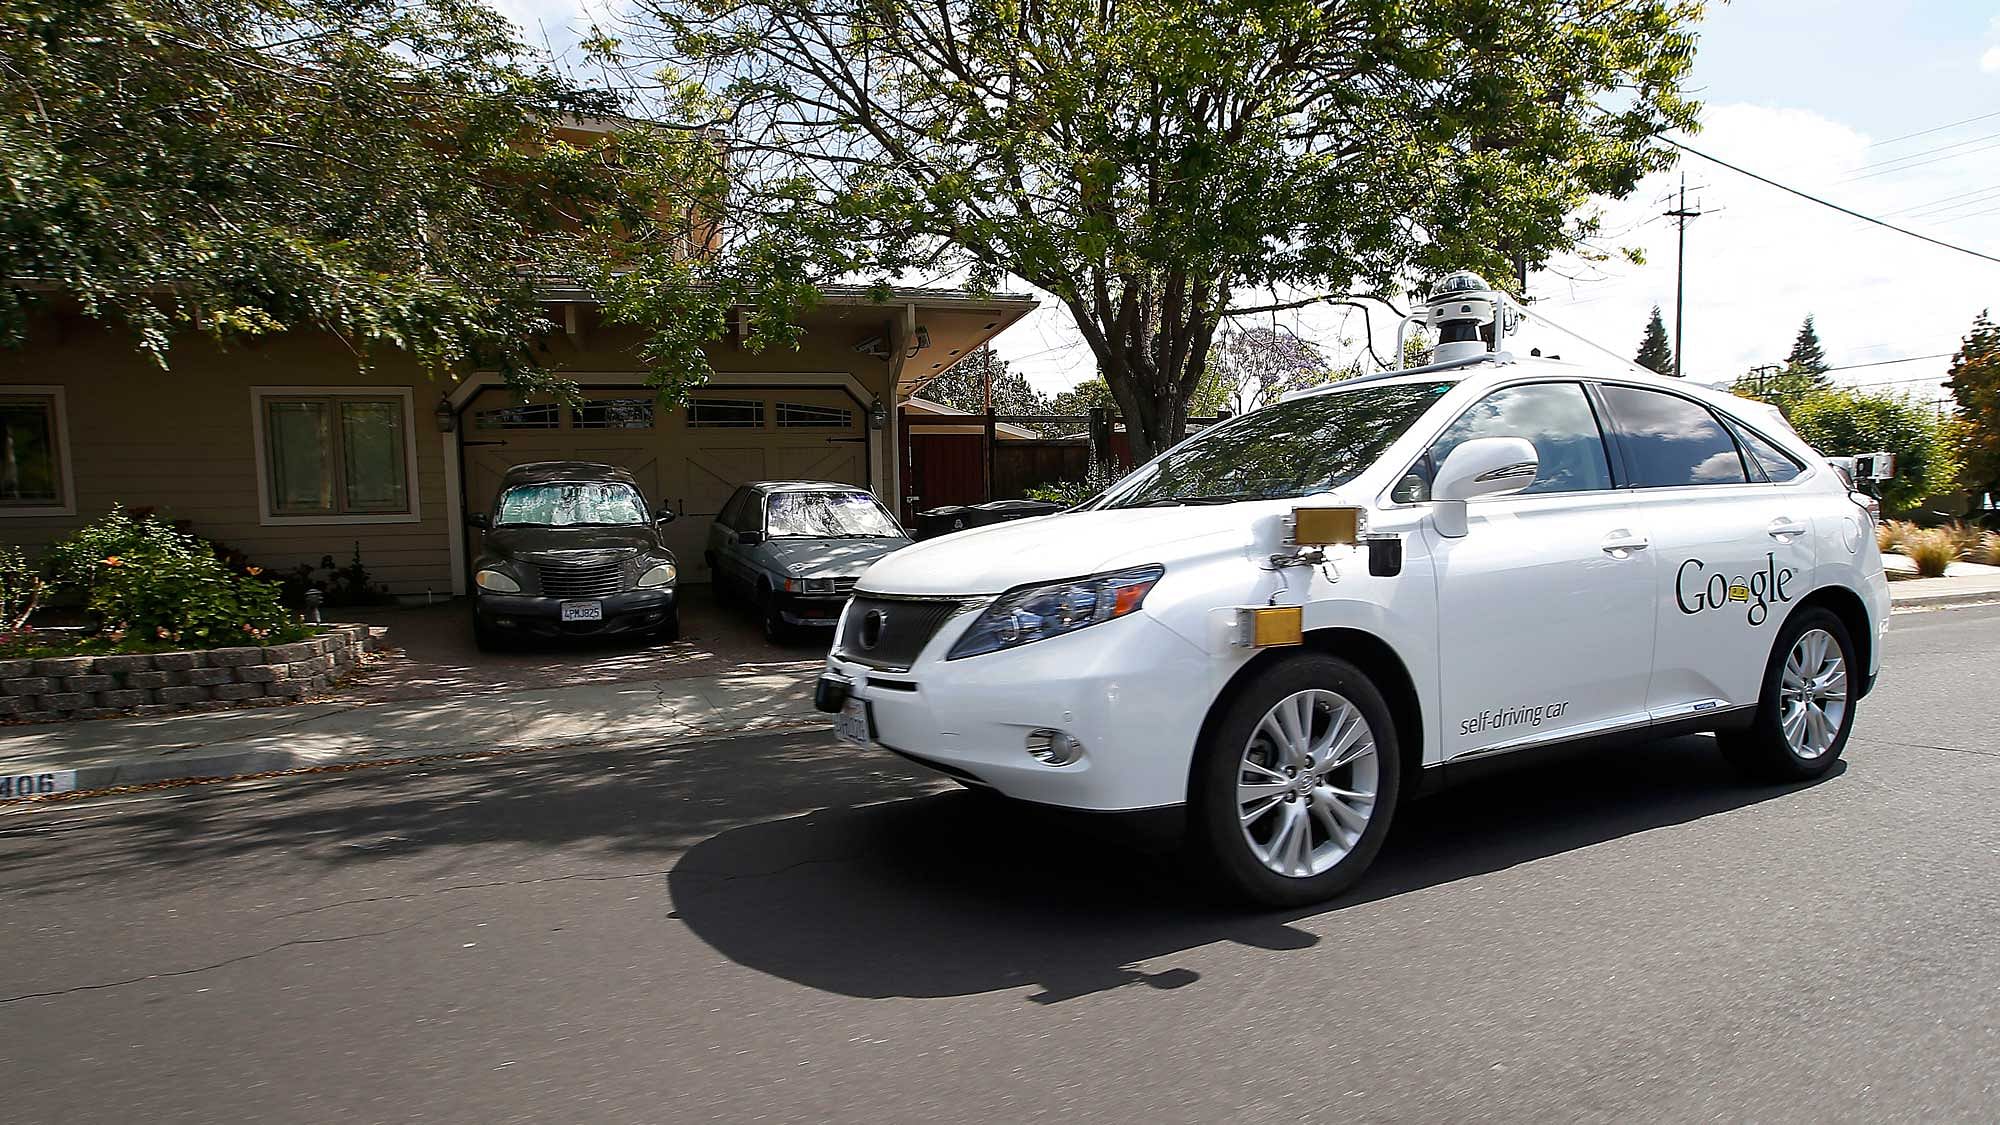 Google’s self-driving Lexus, during a demonstration at the Google campus in Mountain View, California. (Photo: AP)